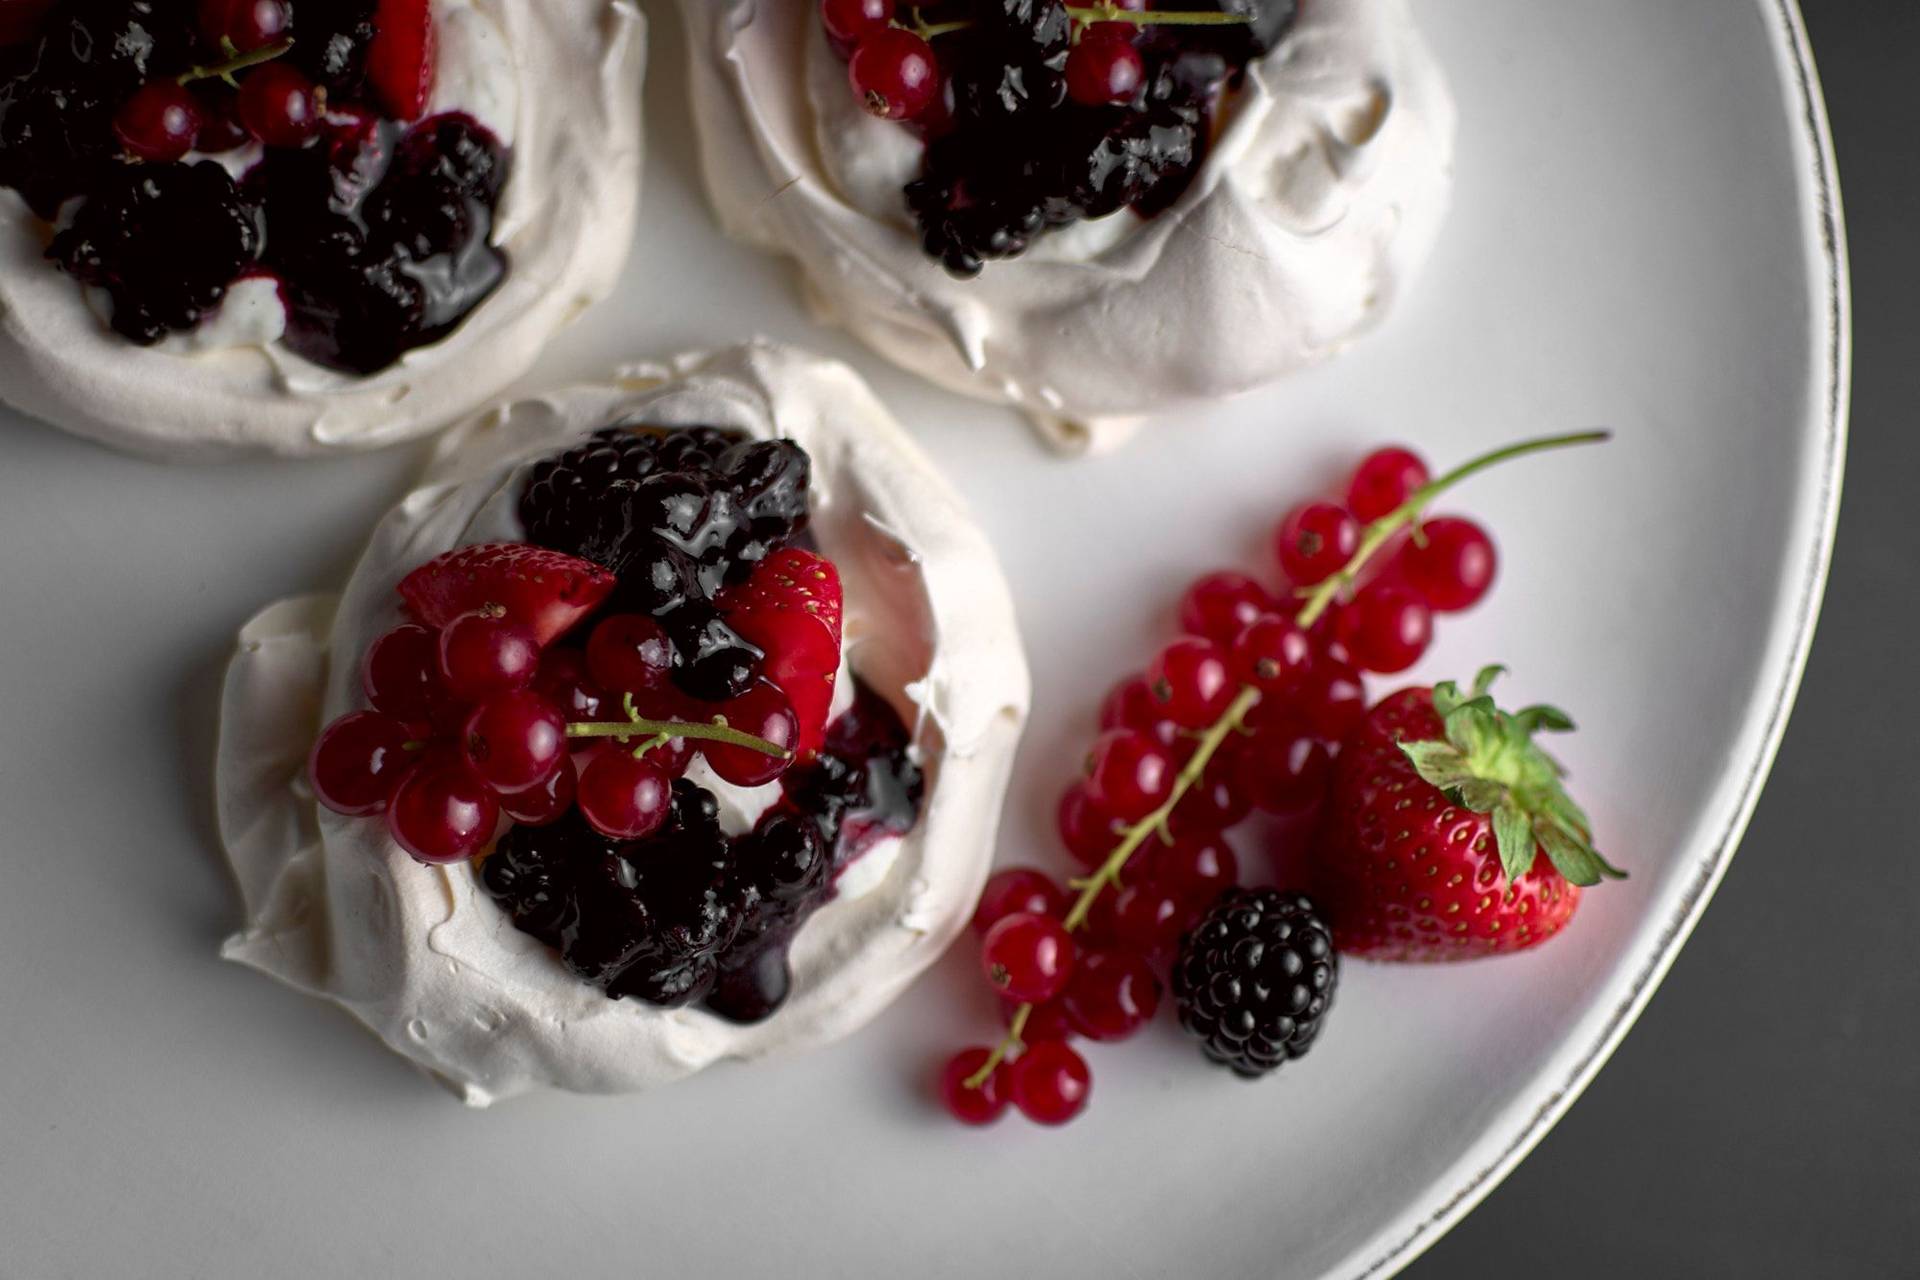 pavlova with berries and salted cream on a white plate with black background